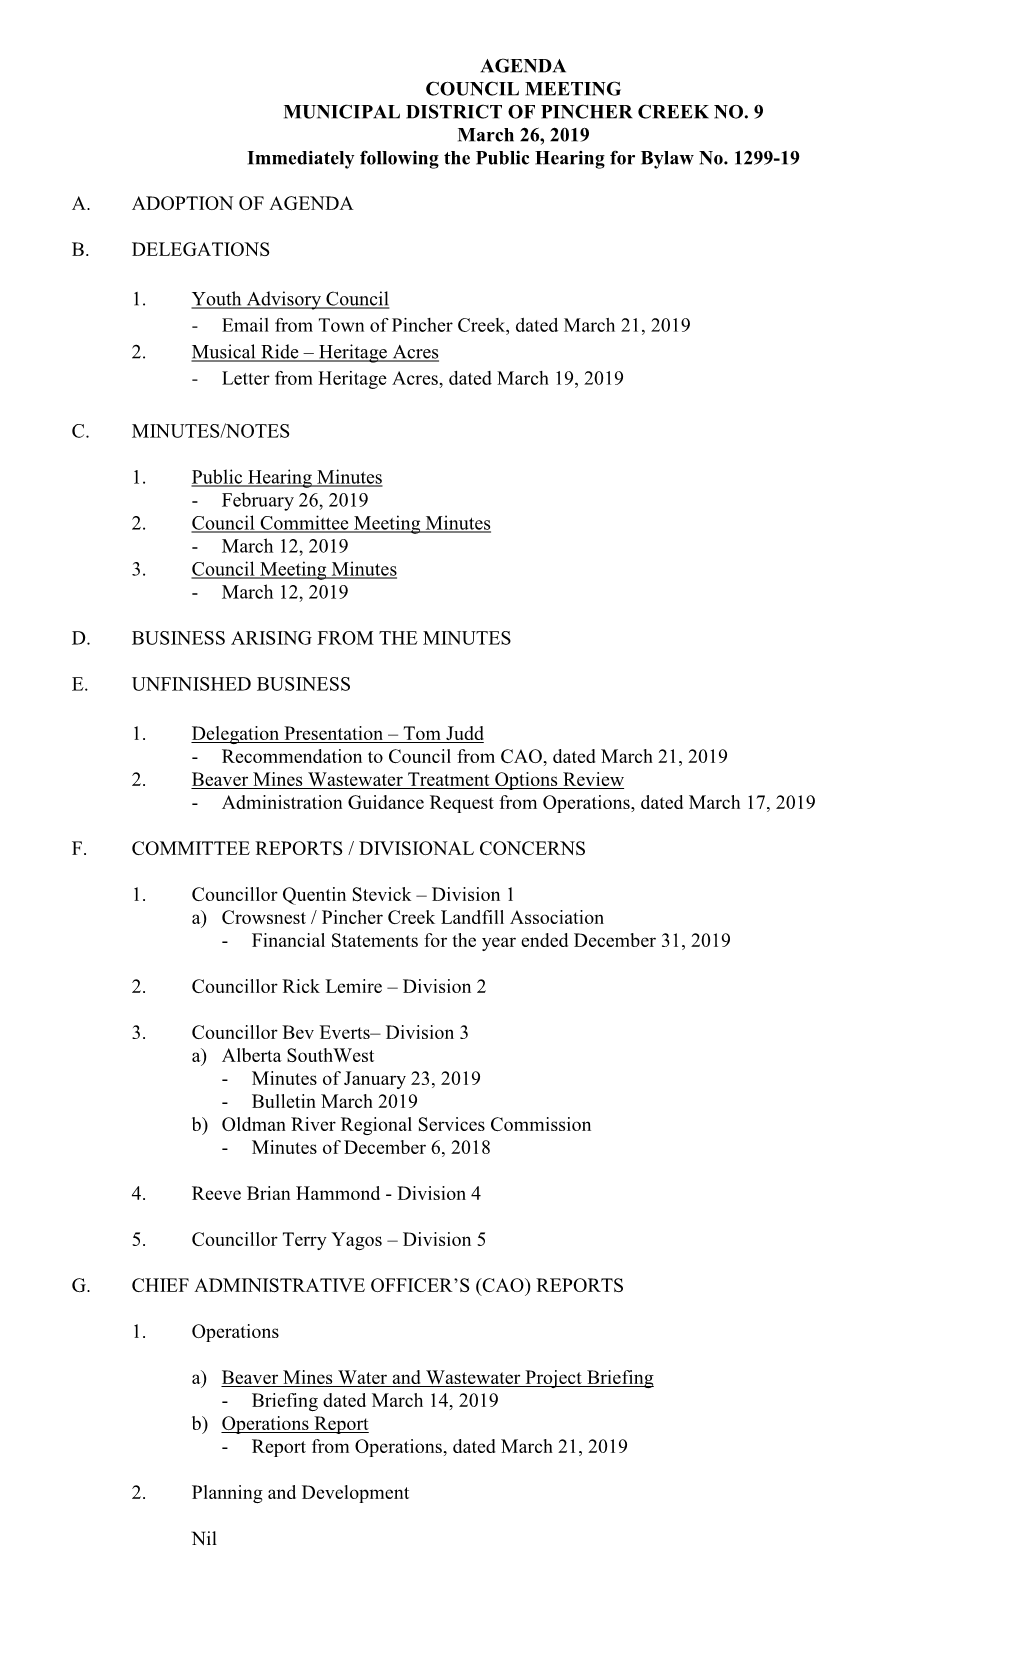 2019-03-26 Council Meeting Agenda Package